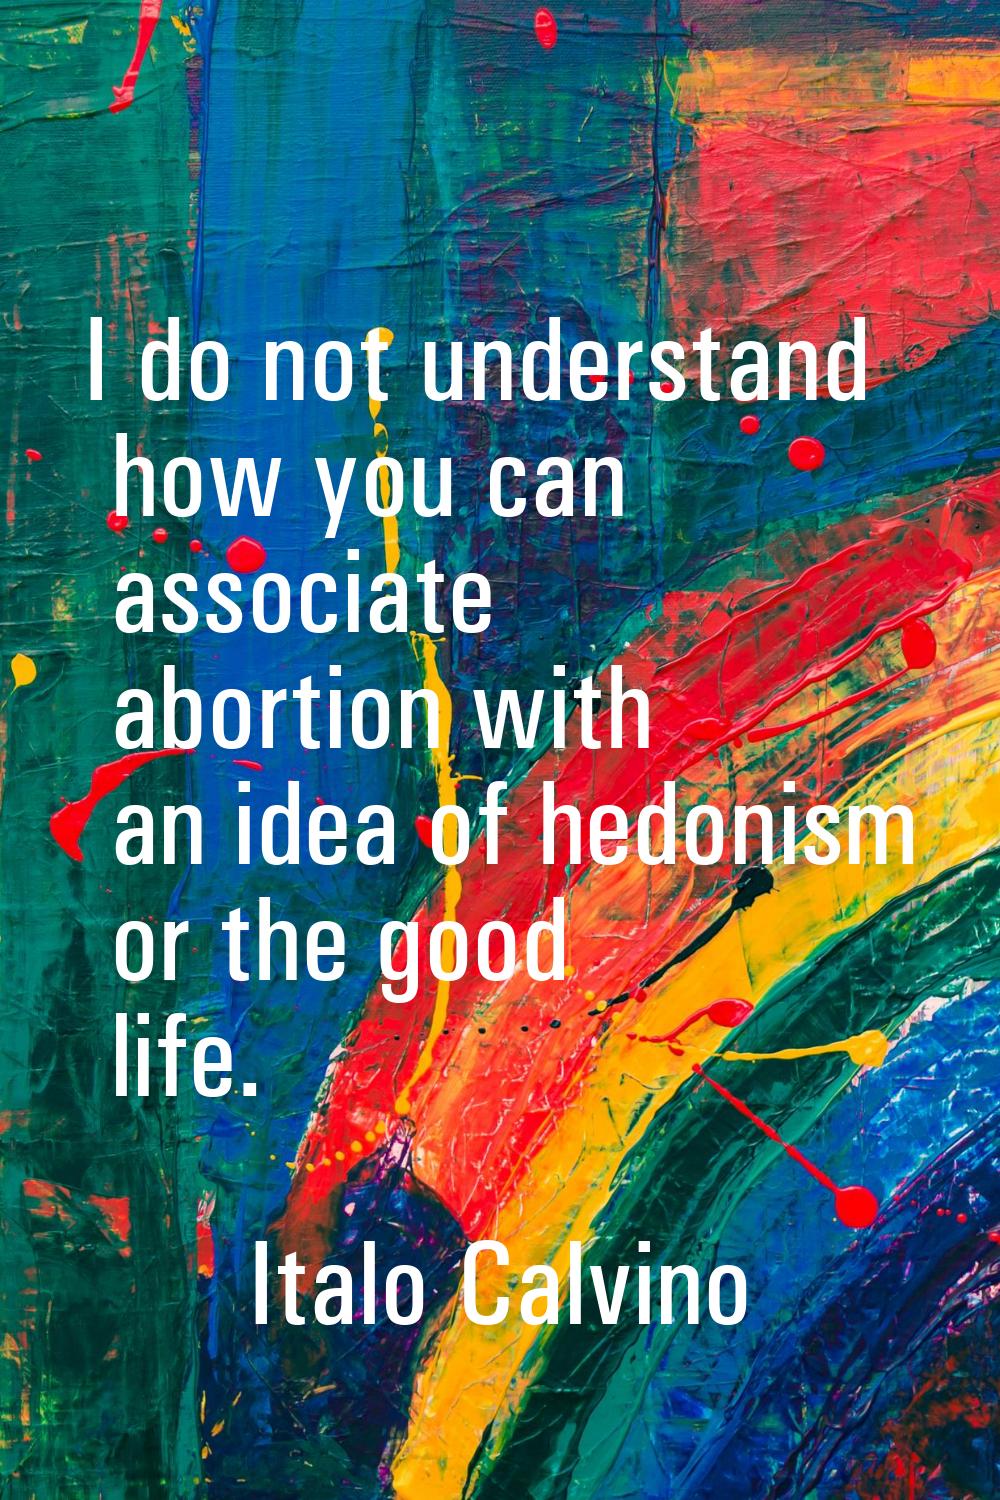 I do not understand how you can associate abortion with an idea of hedonism or the good life.